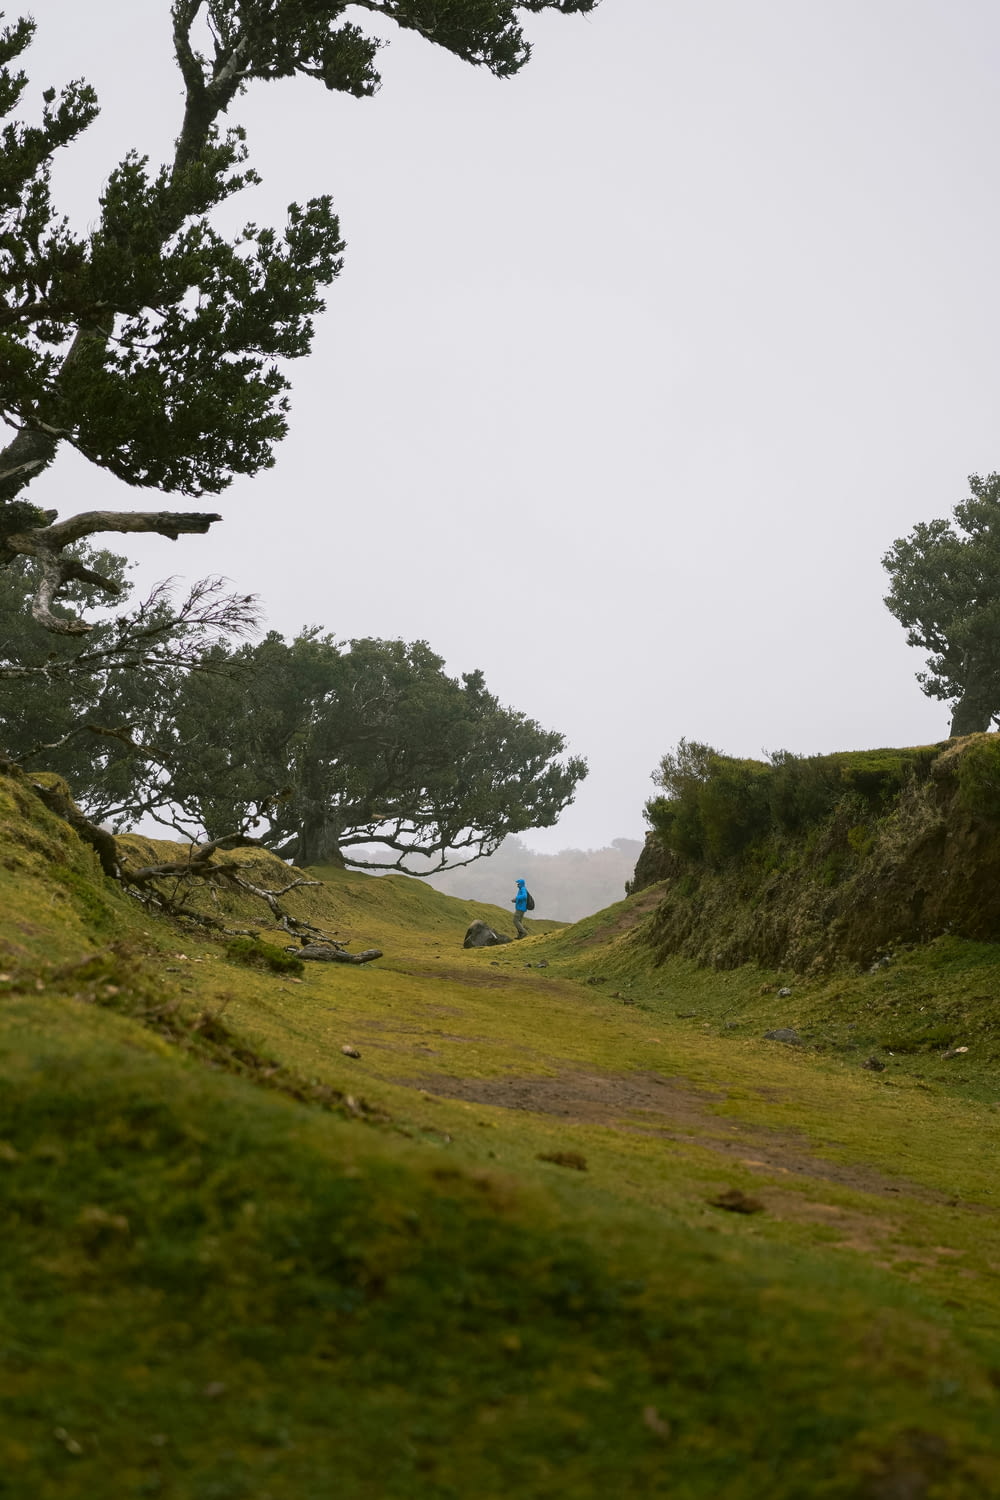 a person walking on a path through a grassy area